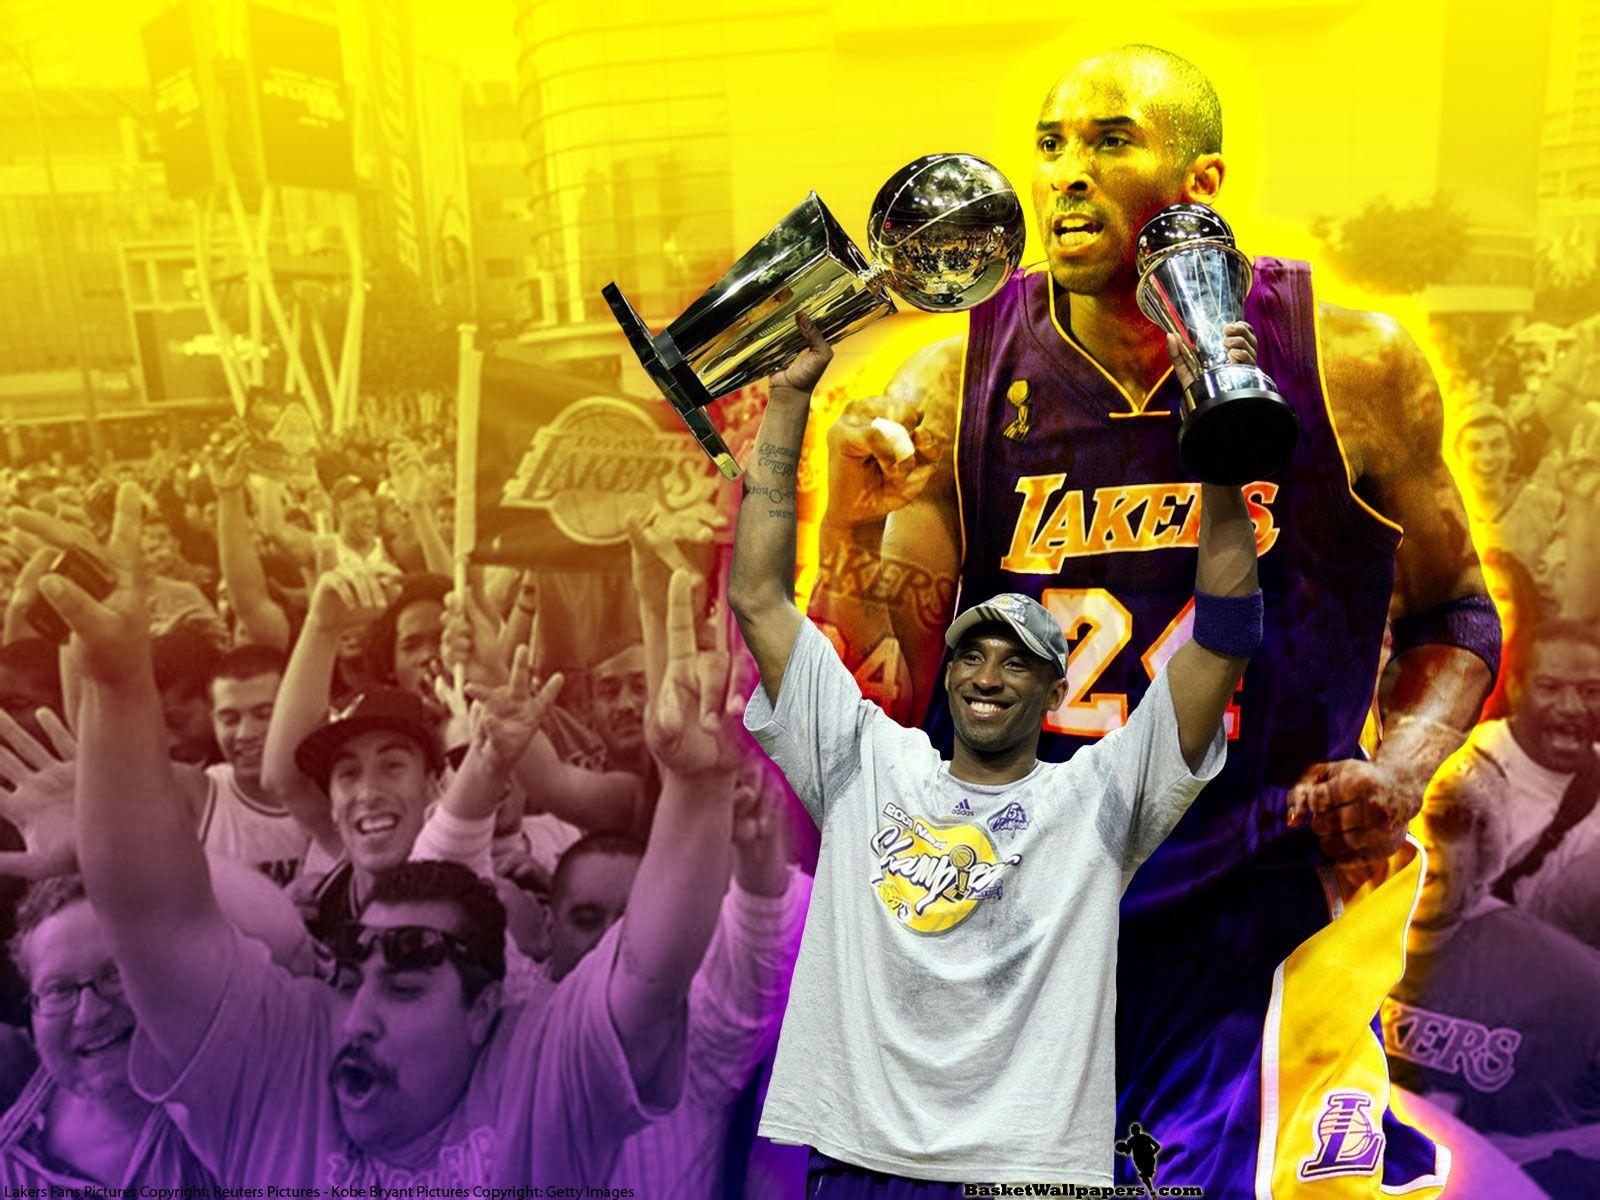 Lakers Wallpaper Design the gradient over the background